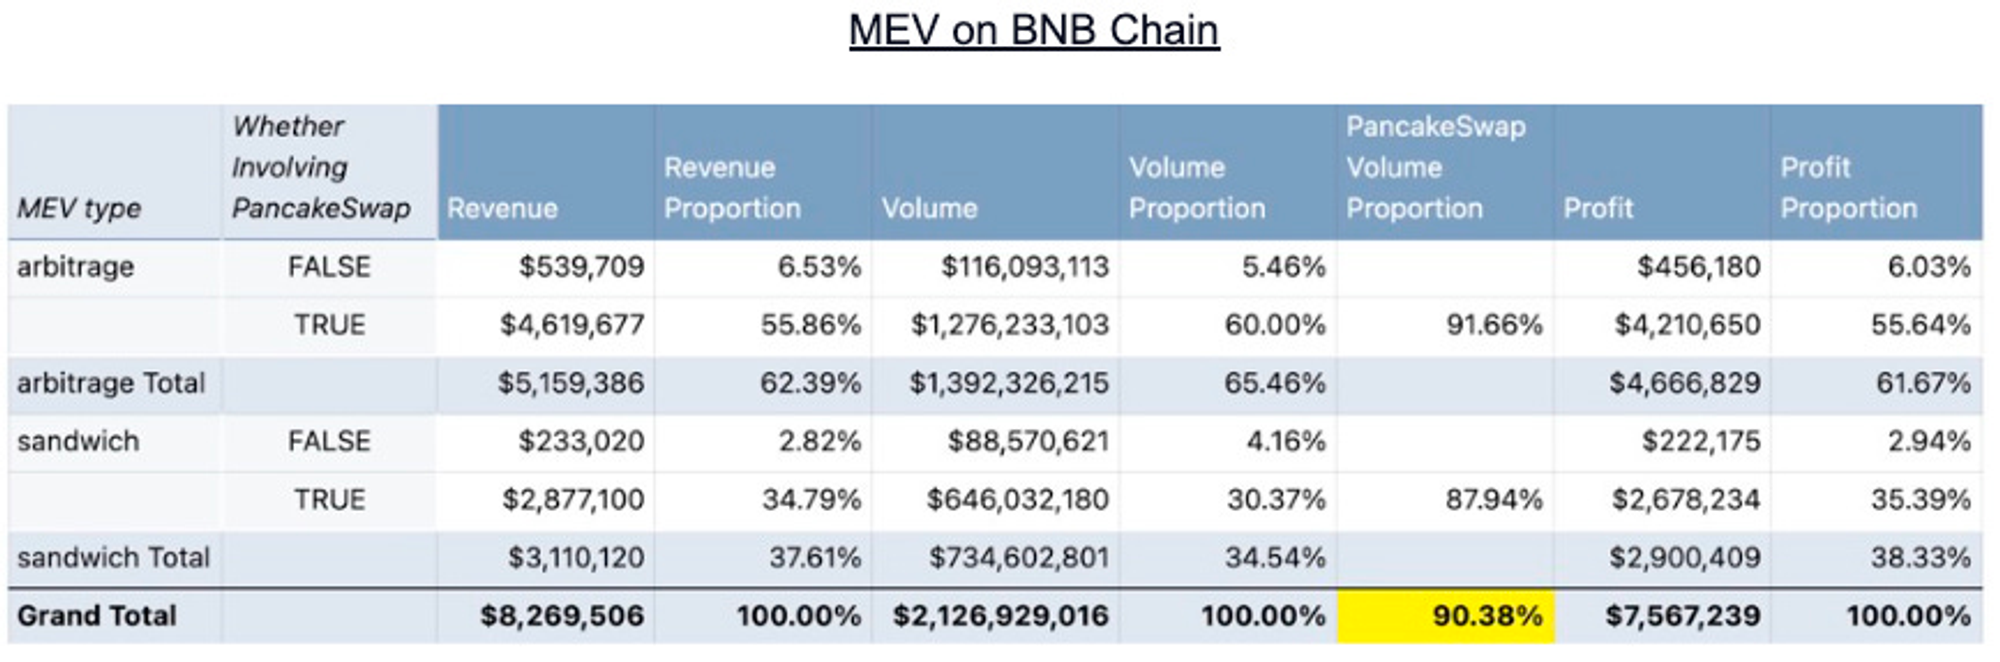 Distribution, proportion, and PancakeSwap's share of MEV income on the BNB chain. Source: EigenPhi